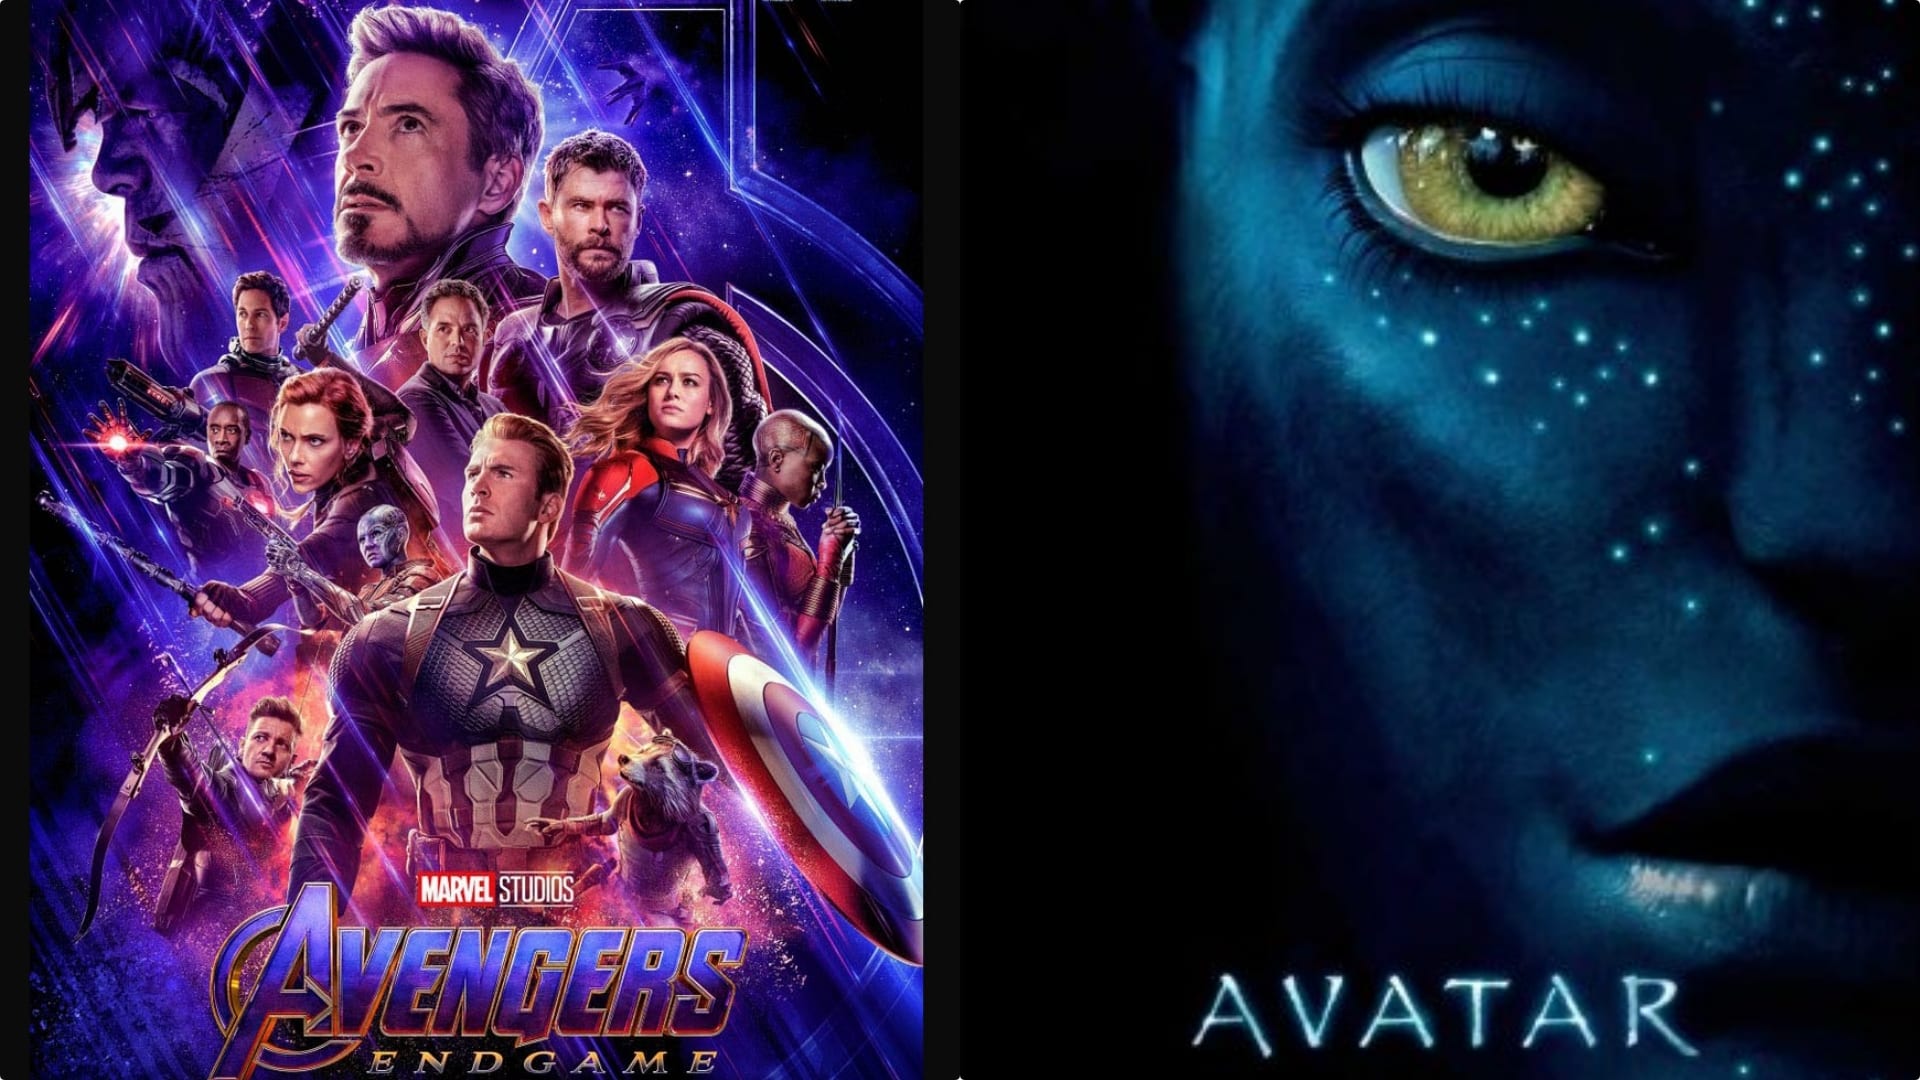 Avatar The Way of Water fails to beat Avengers Endgames opening weekend  collections in India  India Today